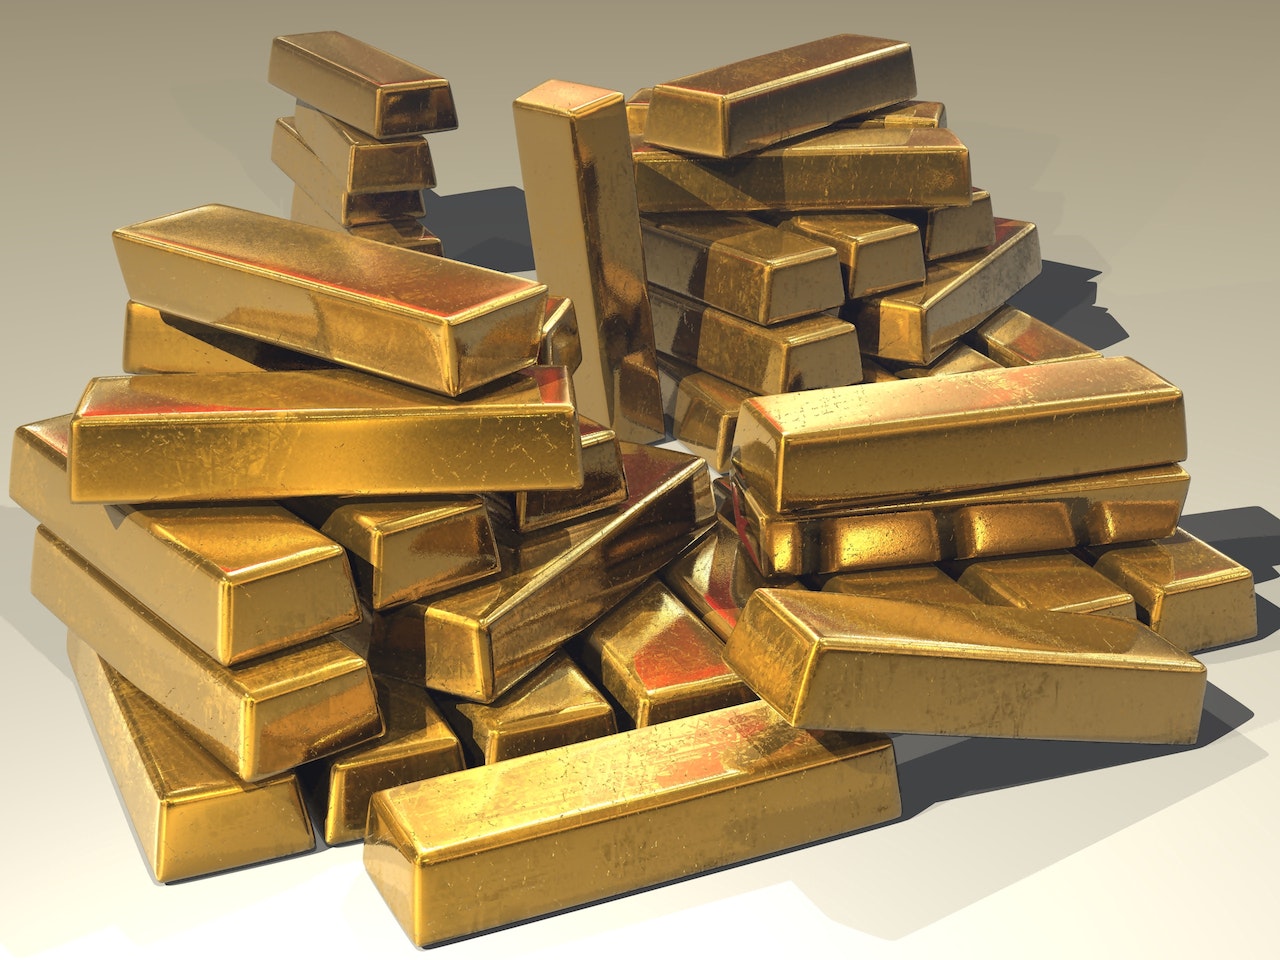 6 Factors to Consider Before Investing in Precious Metals